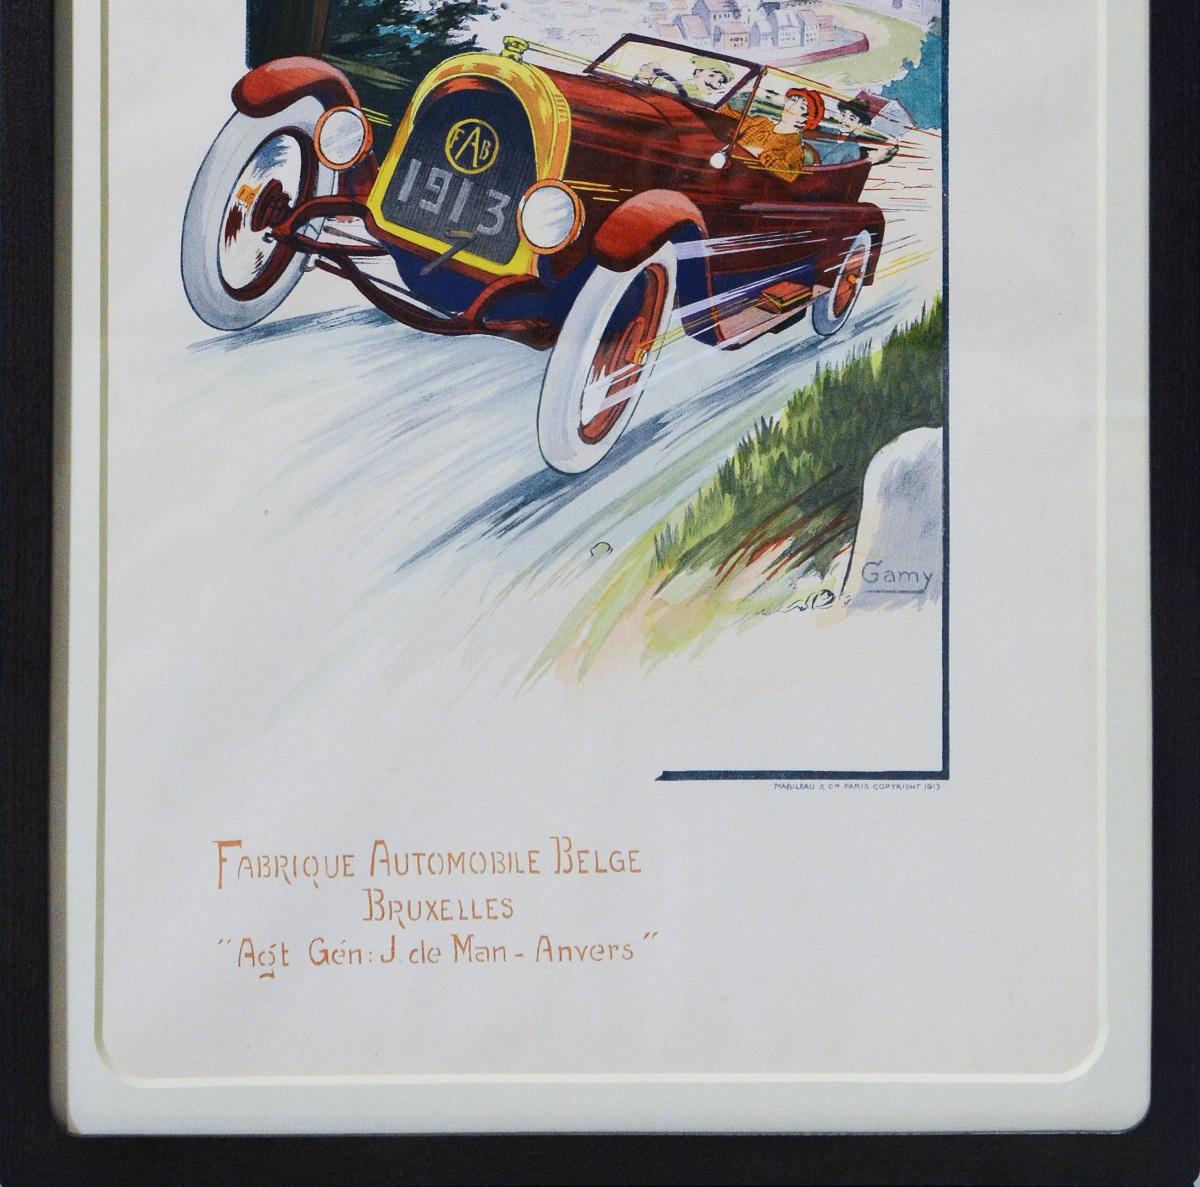 Fabrique Automobile Belge. Racing Car. - Print by Unknown